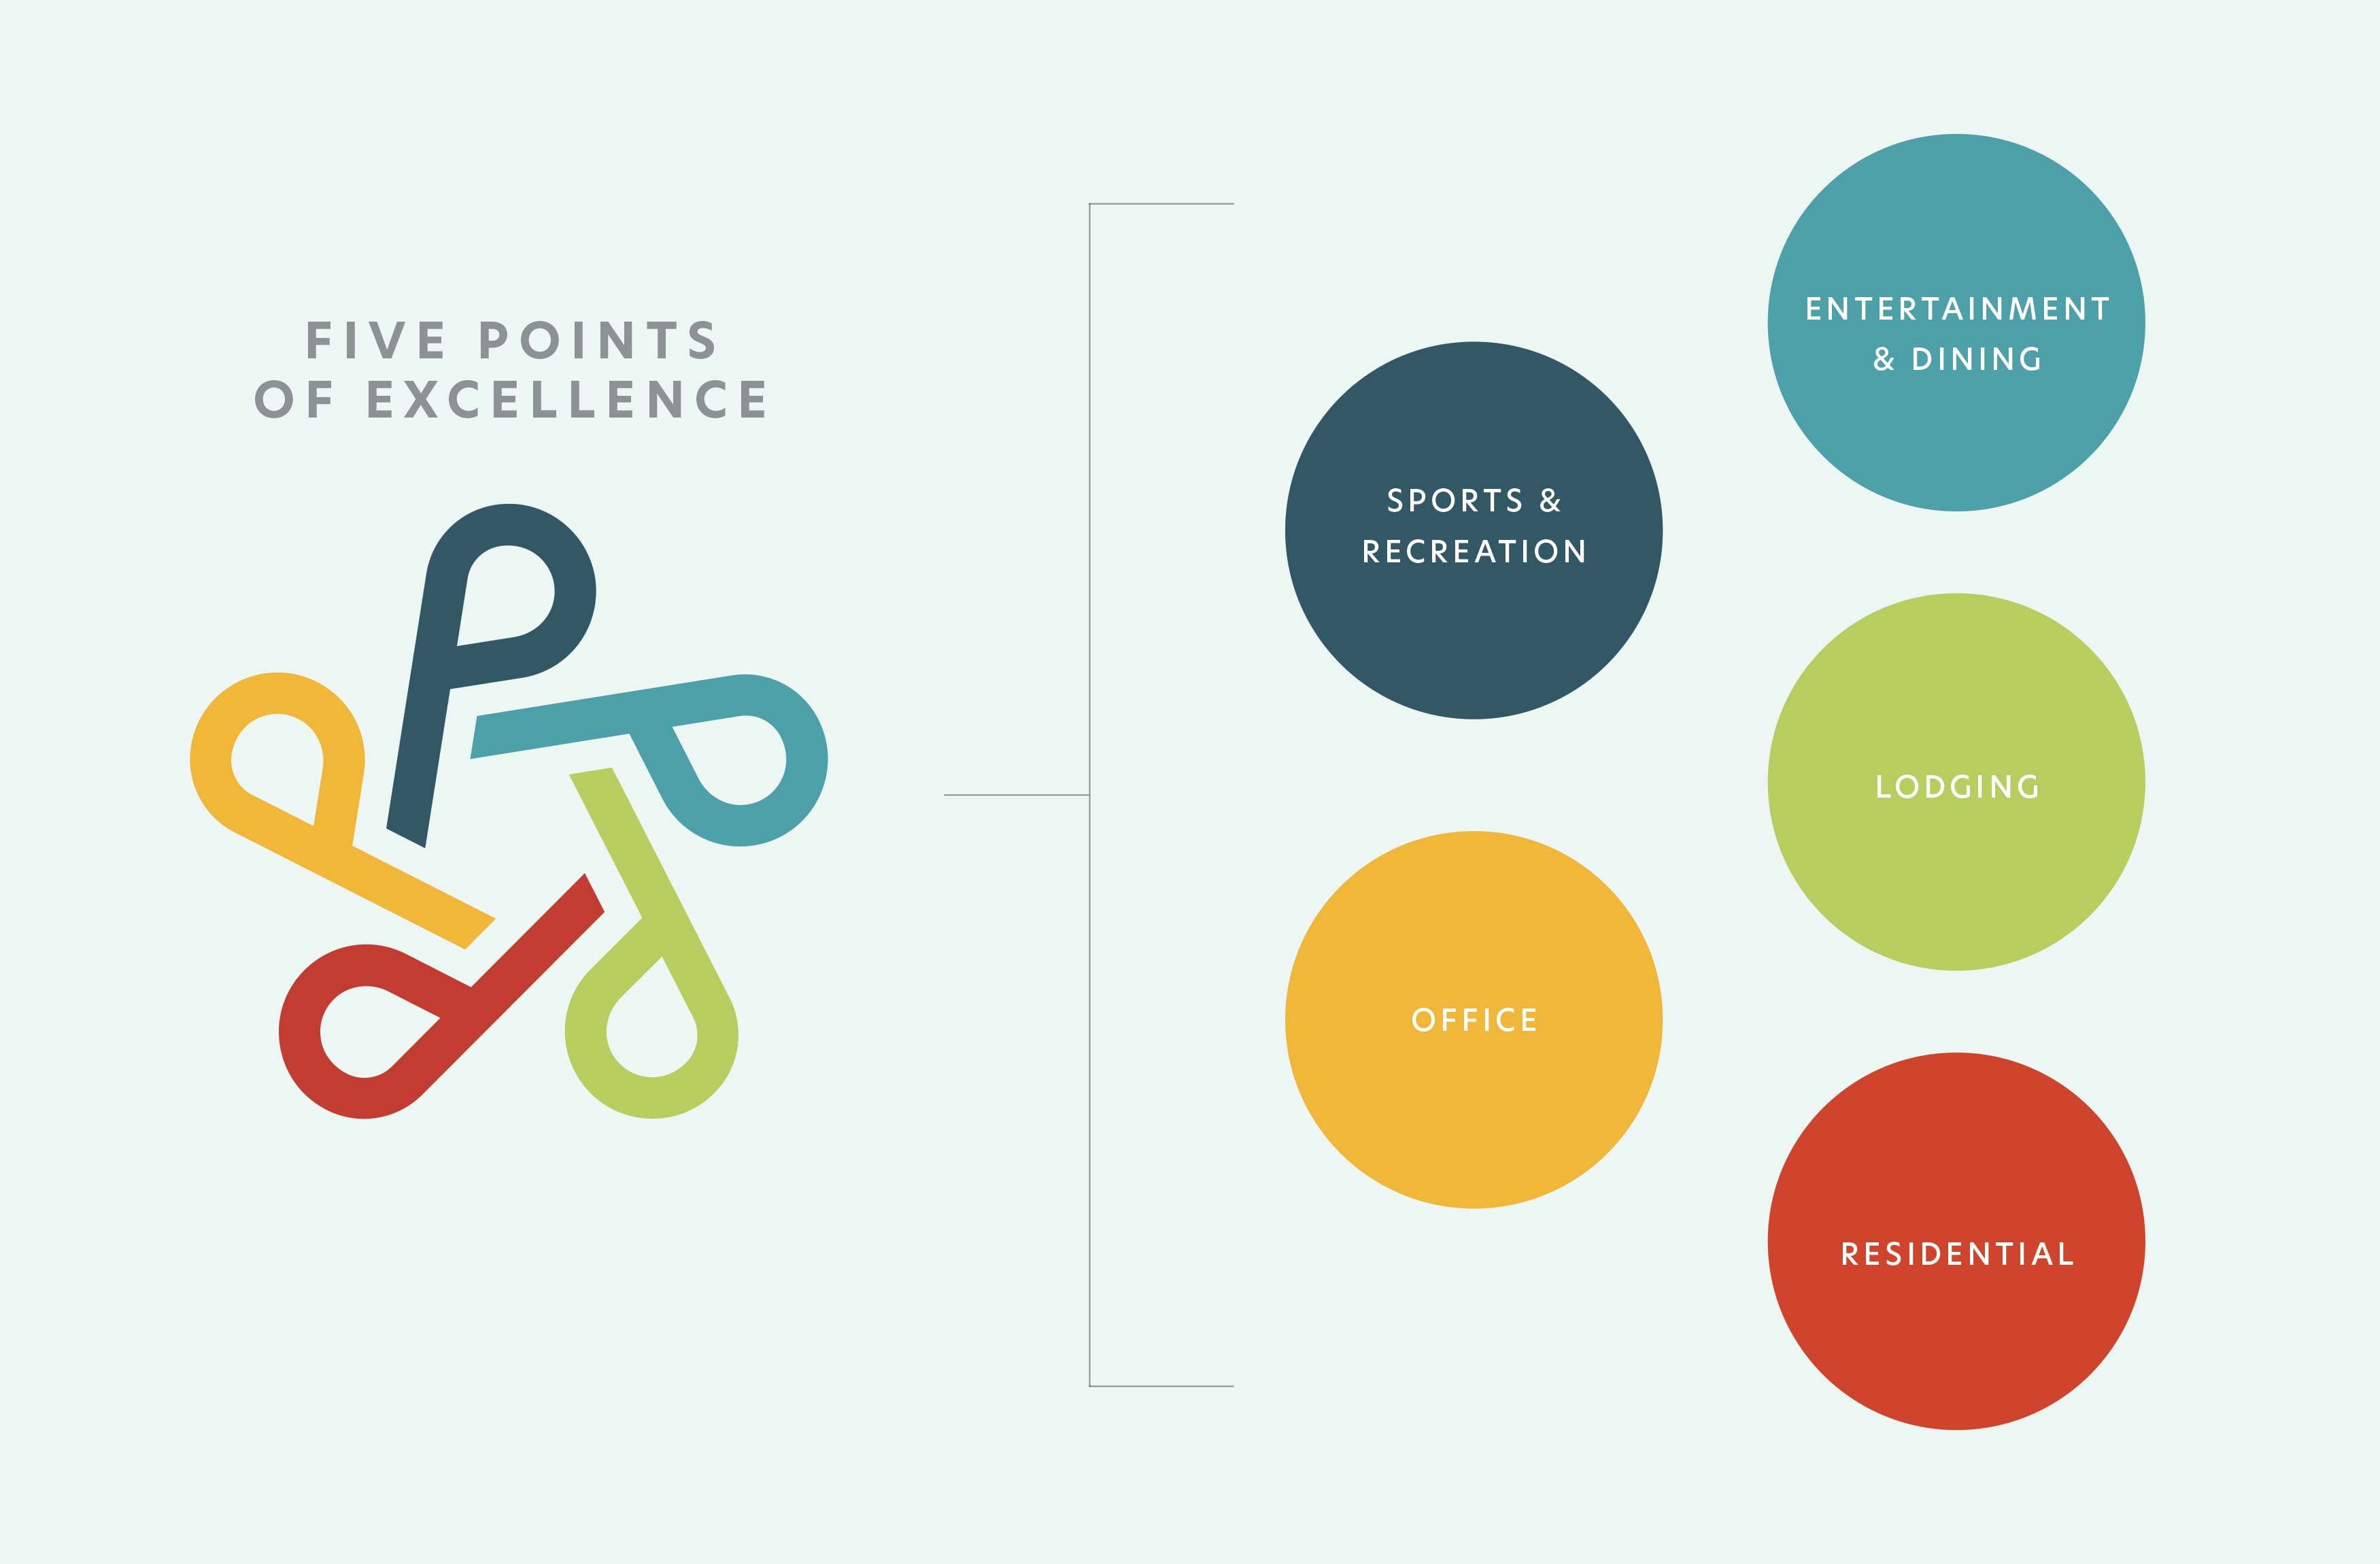 Brand touchpoints for Paragon Star Branding graphic. 